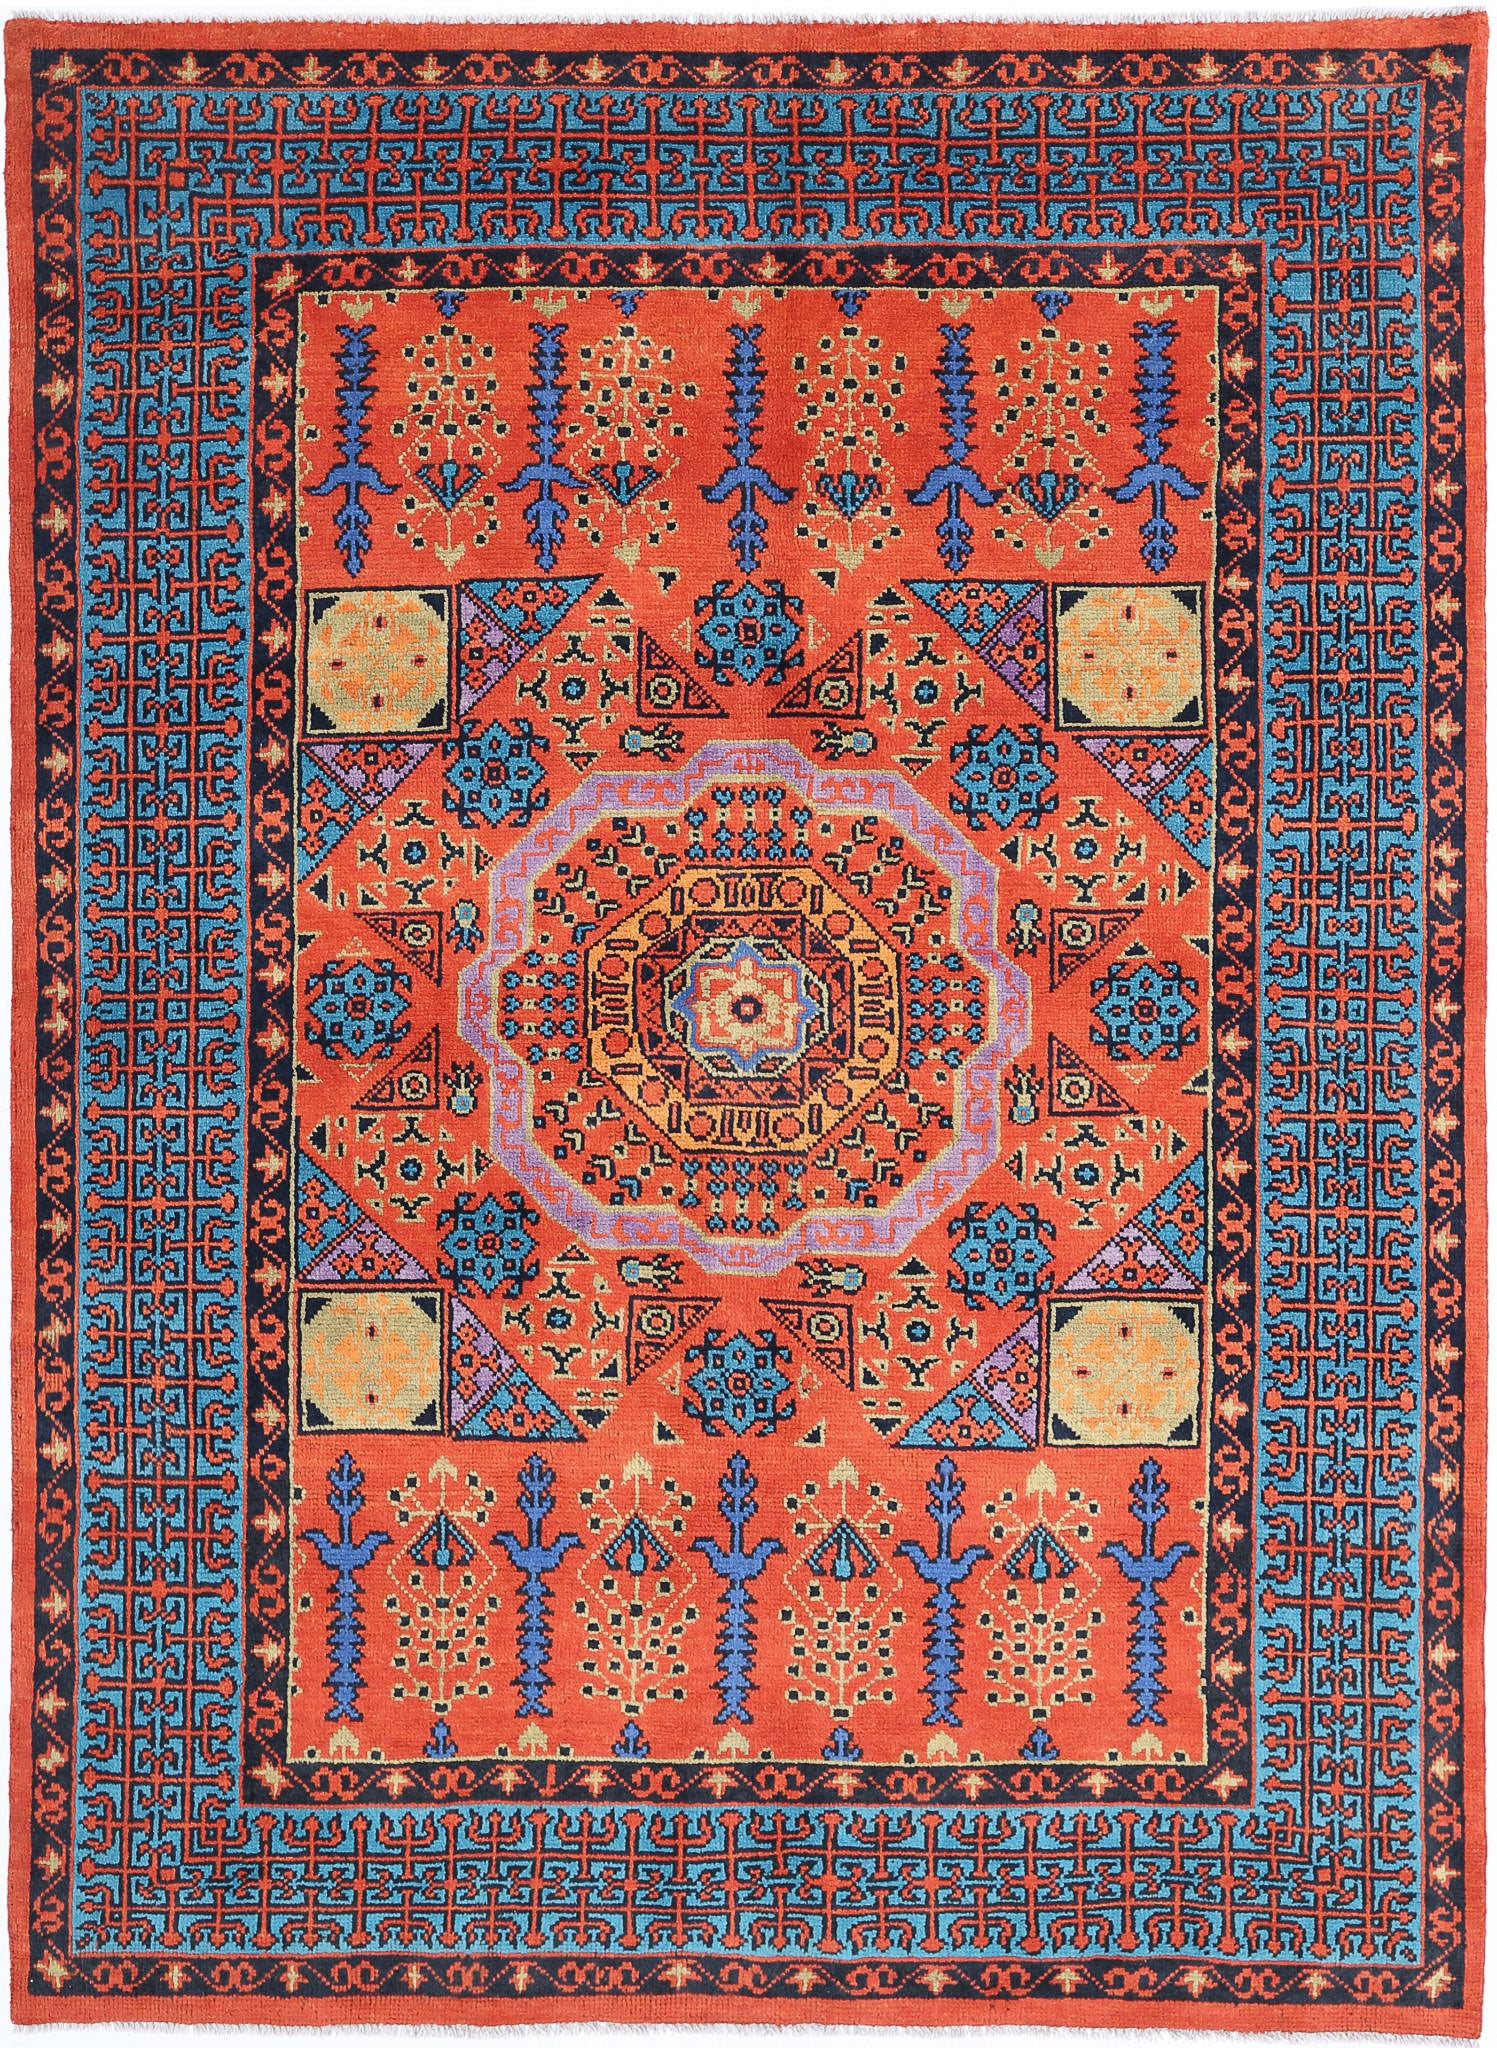 Revival-hand-knotted-qarghani-wool-rug-5014090.jpg